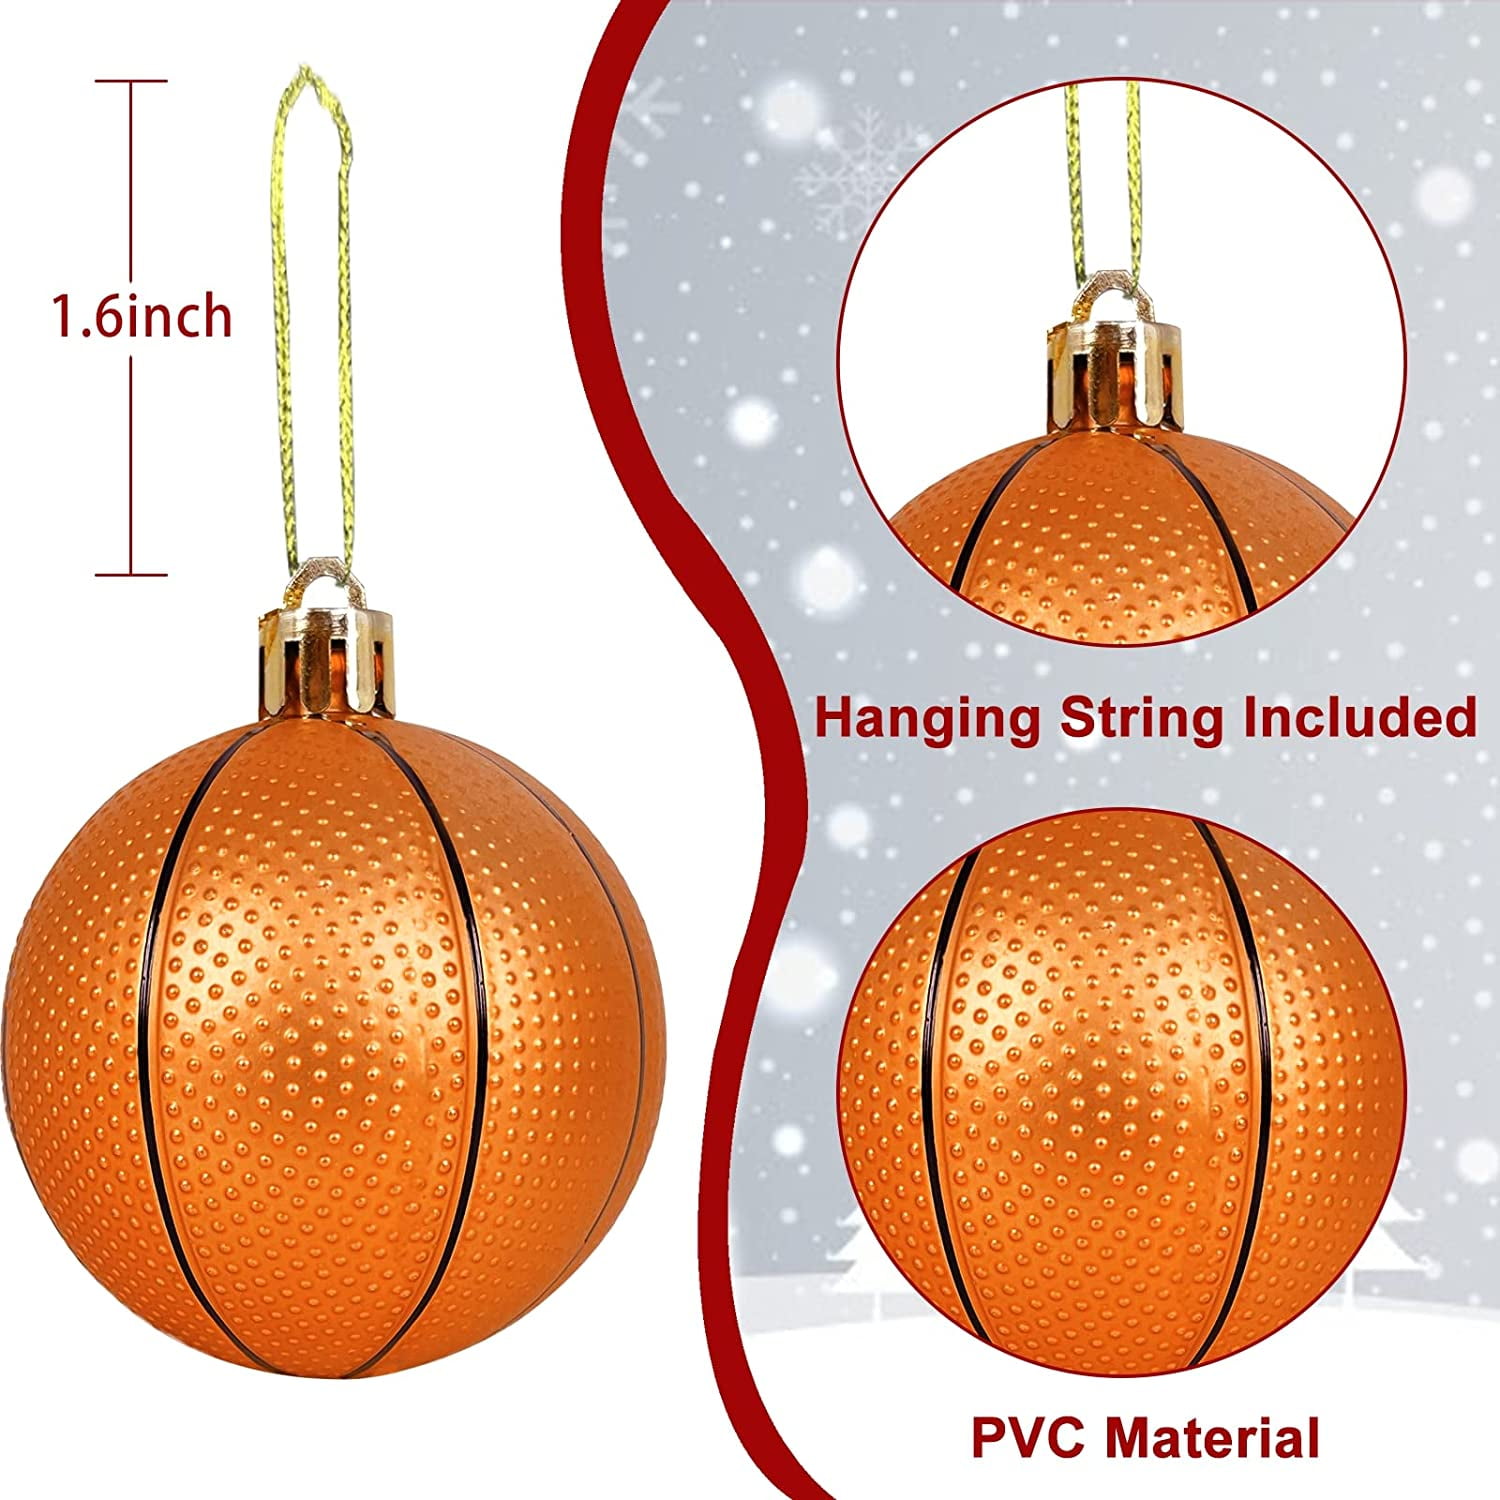 TURNMEON 6 Pack Baseball Christmas Ball Ornaments Christmas Decorations 2.36 Inch Shatterproof Xmas Tree Ornaments Balls with Hanging Loop for Holiday Party Christmas Decorations Indoor Outdoor Home